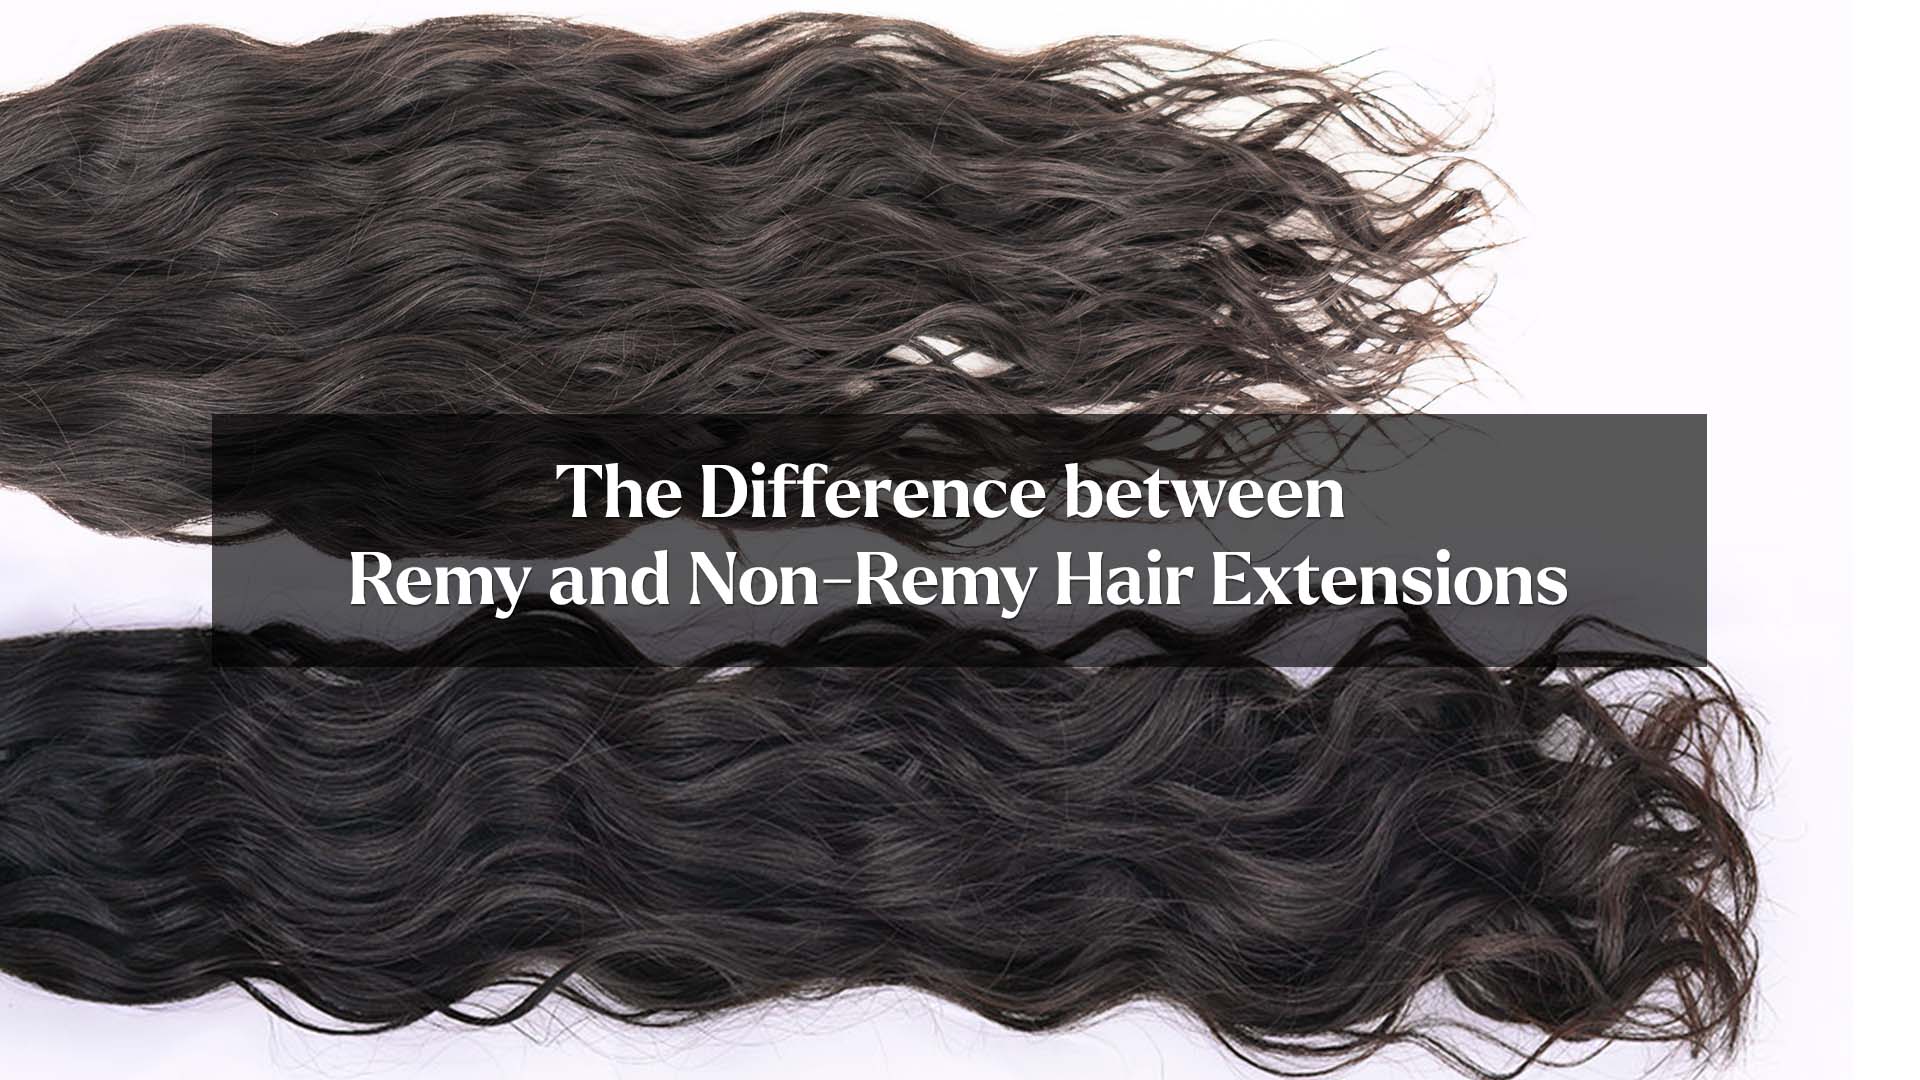 The Difference between Remy and Non-Remy Hair Extensions